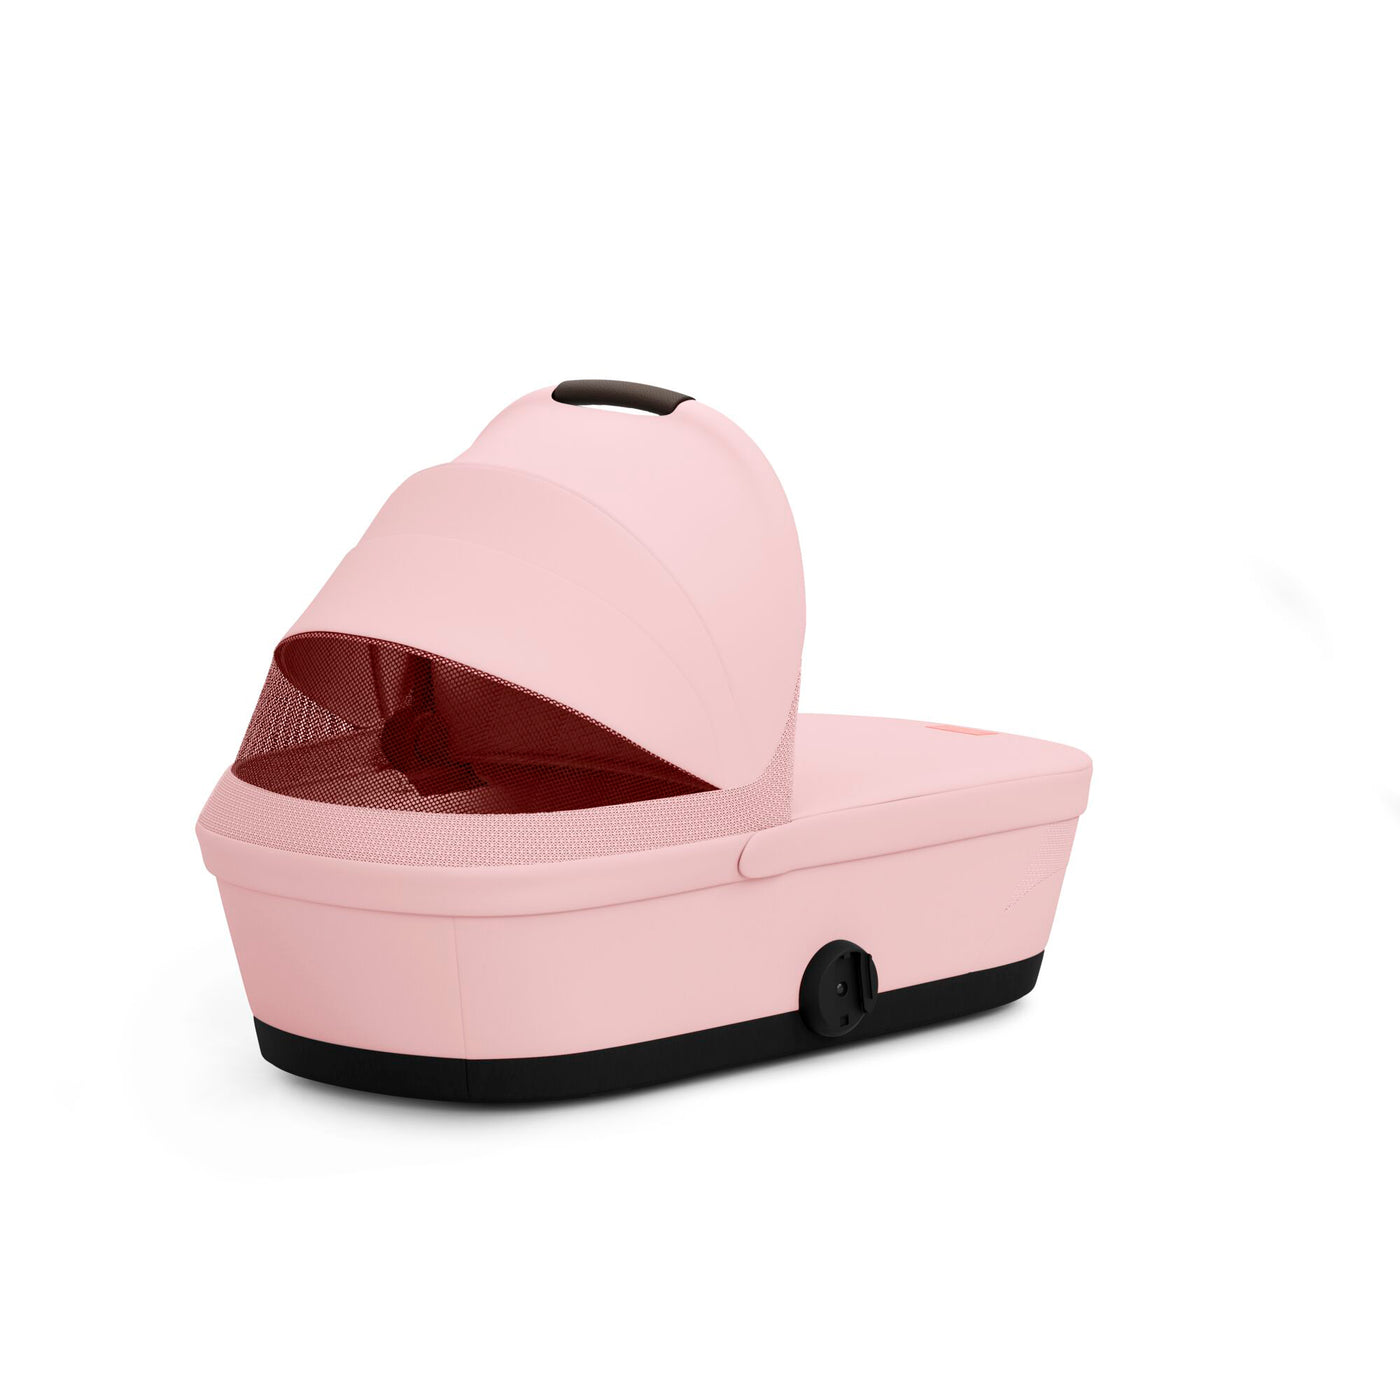 Cybex Melio Cot - Candy Pink